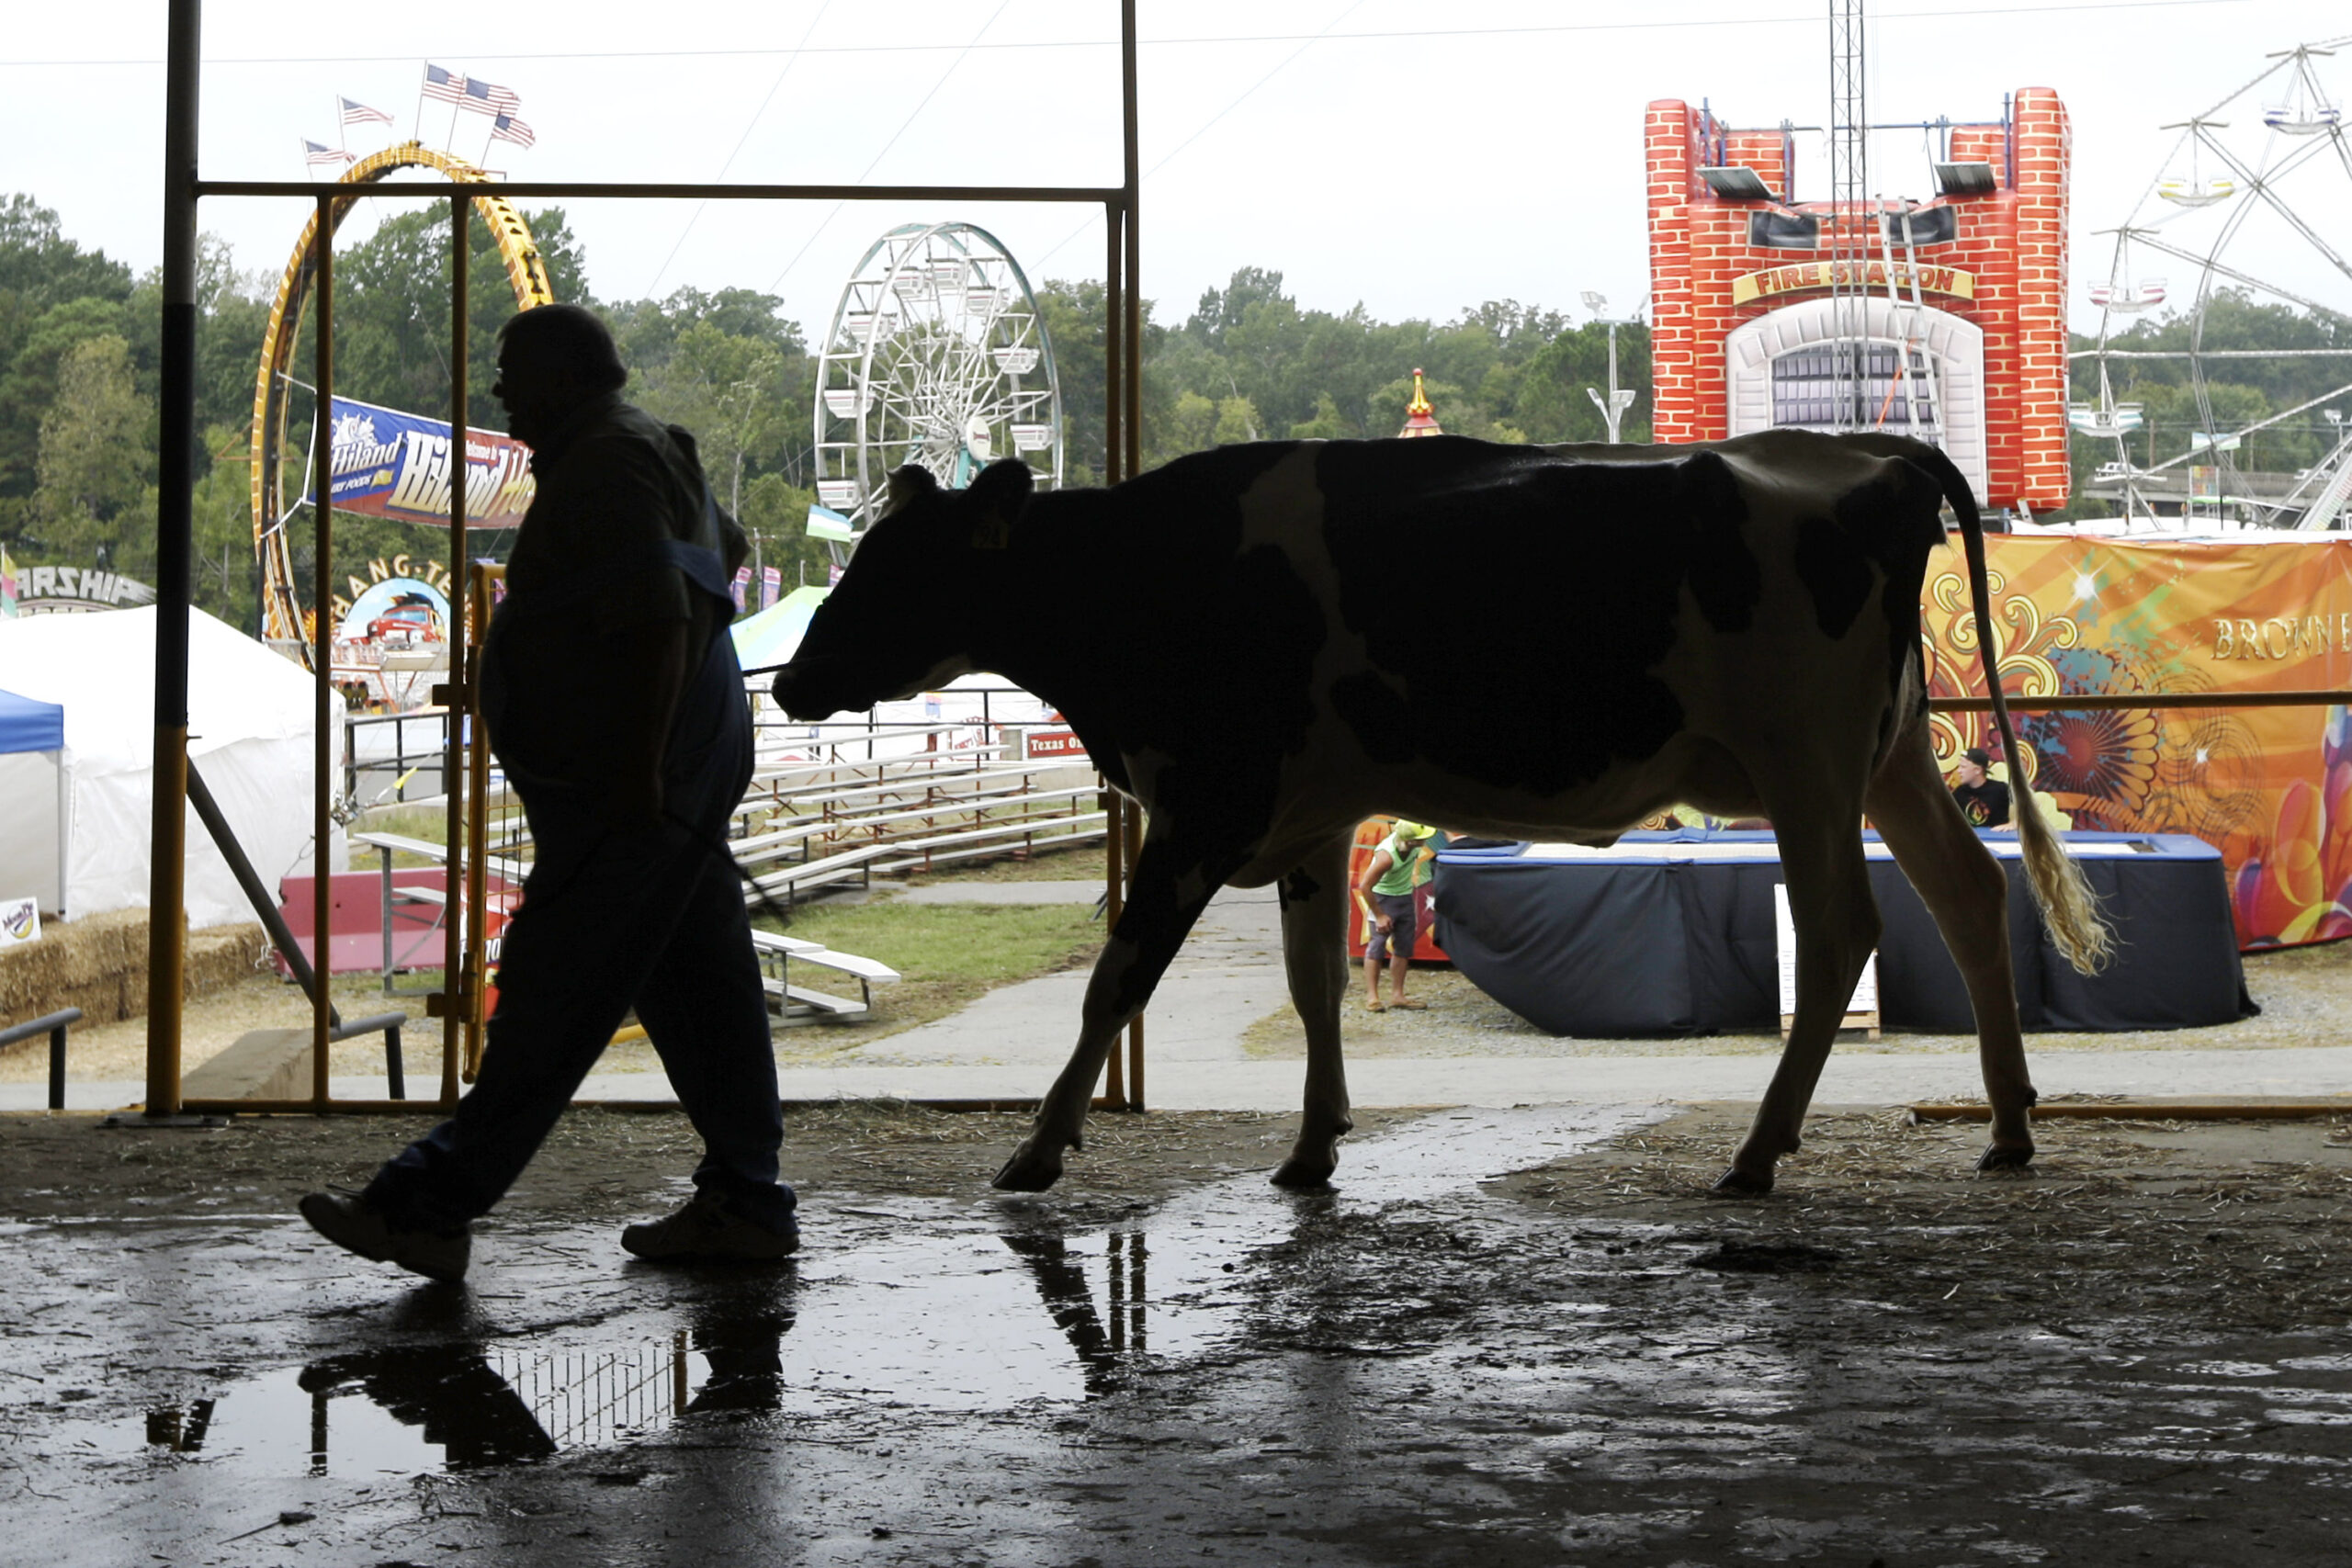 A man leads a cow in a cattle barn.